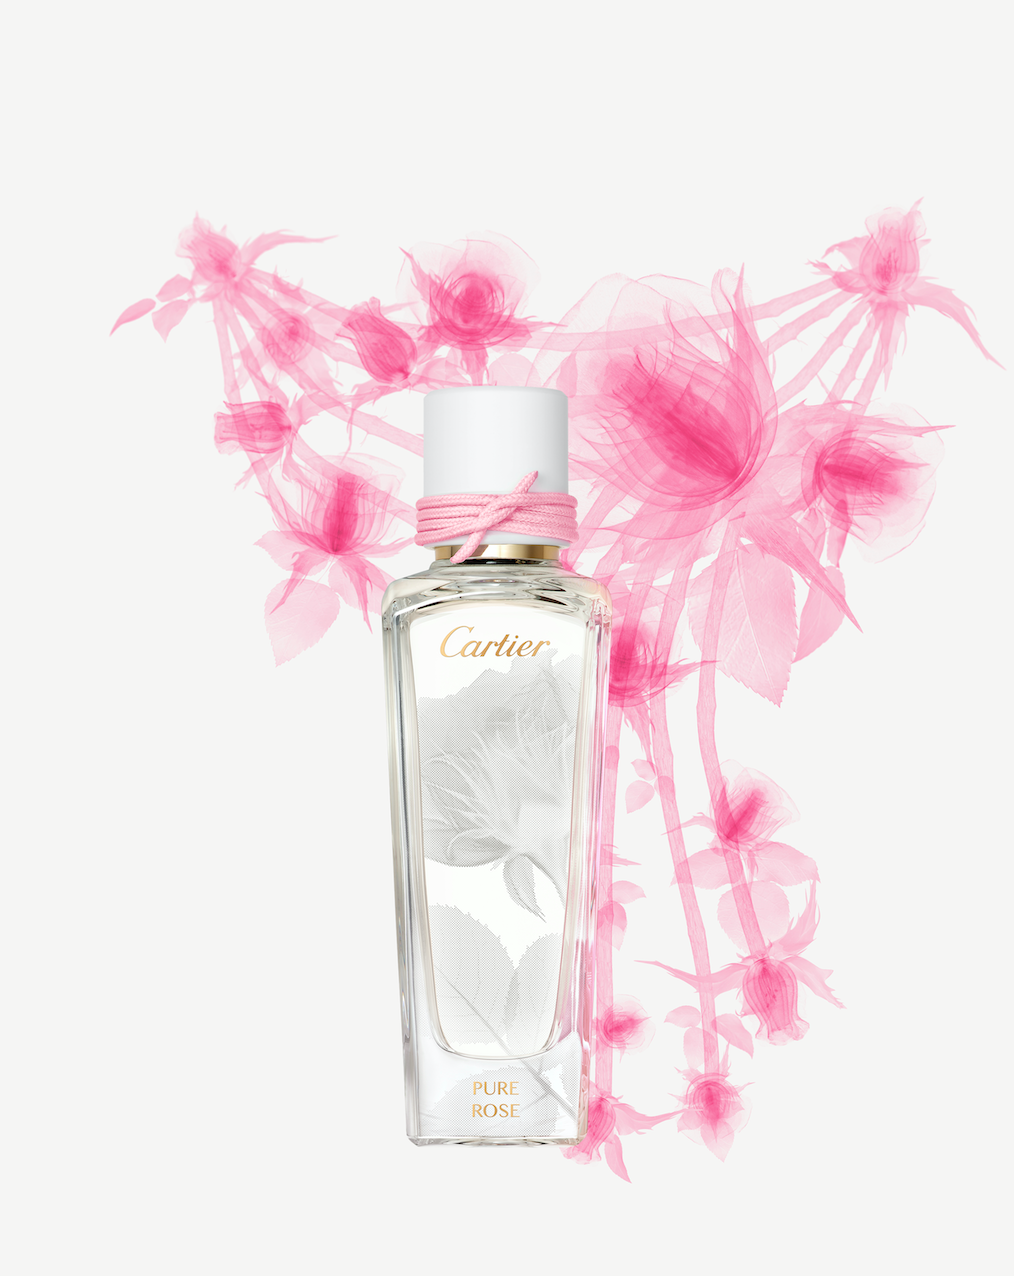 Nuevos-perfumes-Cartier-i-only-love-wild-roses-2021-5